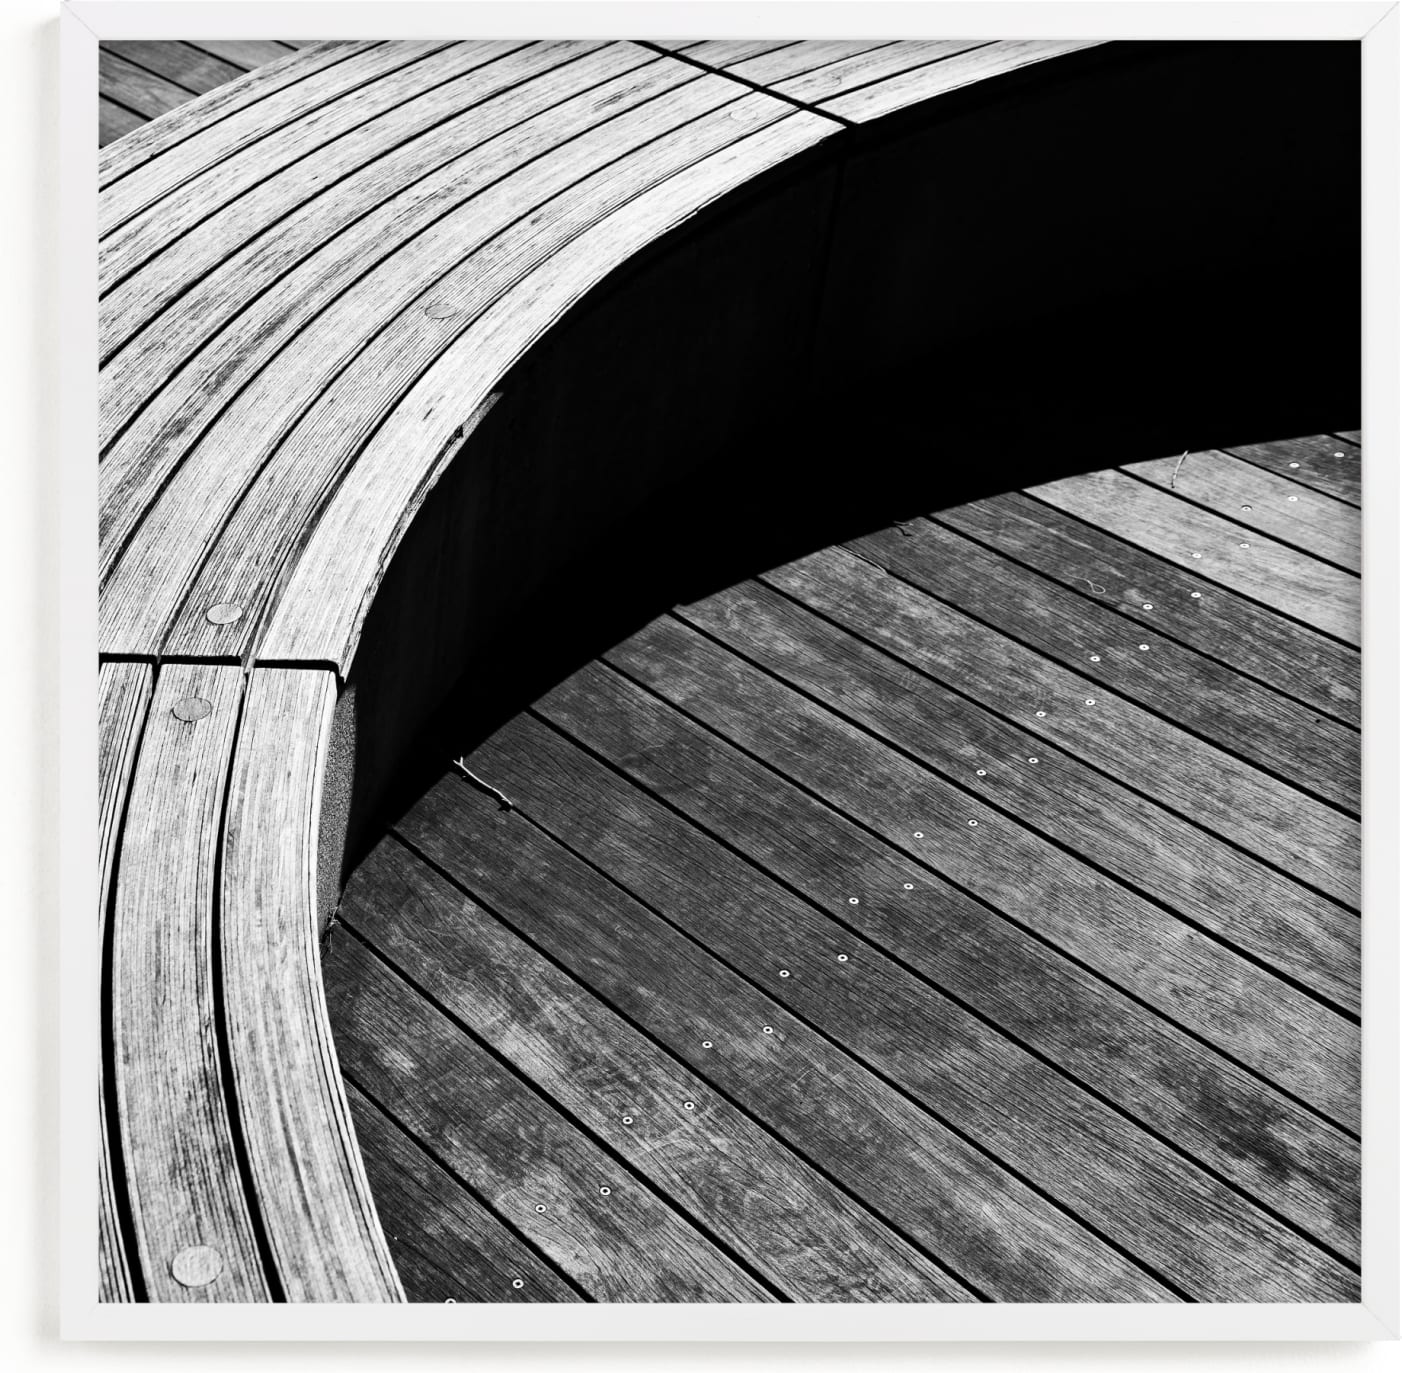 This is a black and white art by Van Tsao called Curve Bench Geometric I.